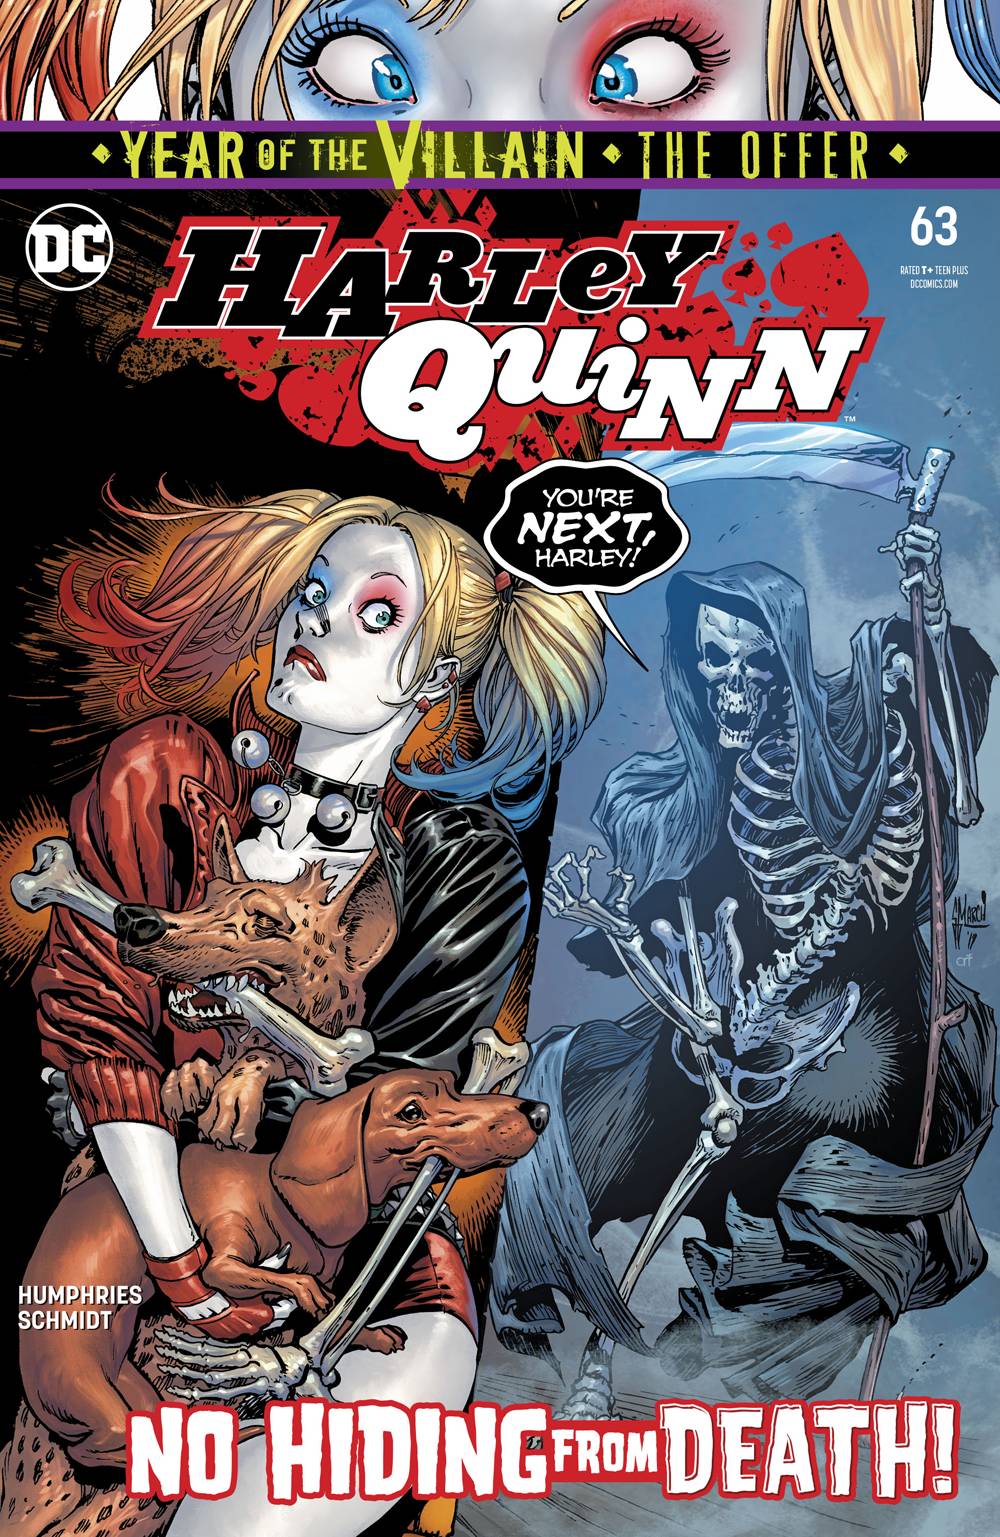 HARLEY QUINN #63 A Guillem March Year Of The Villain THE OFFER (07/03/2019) DC